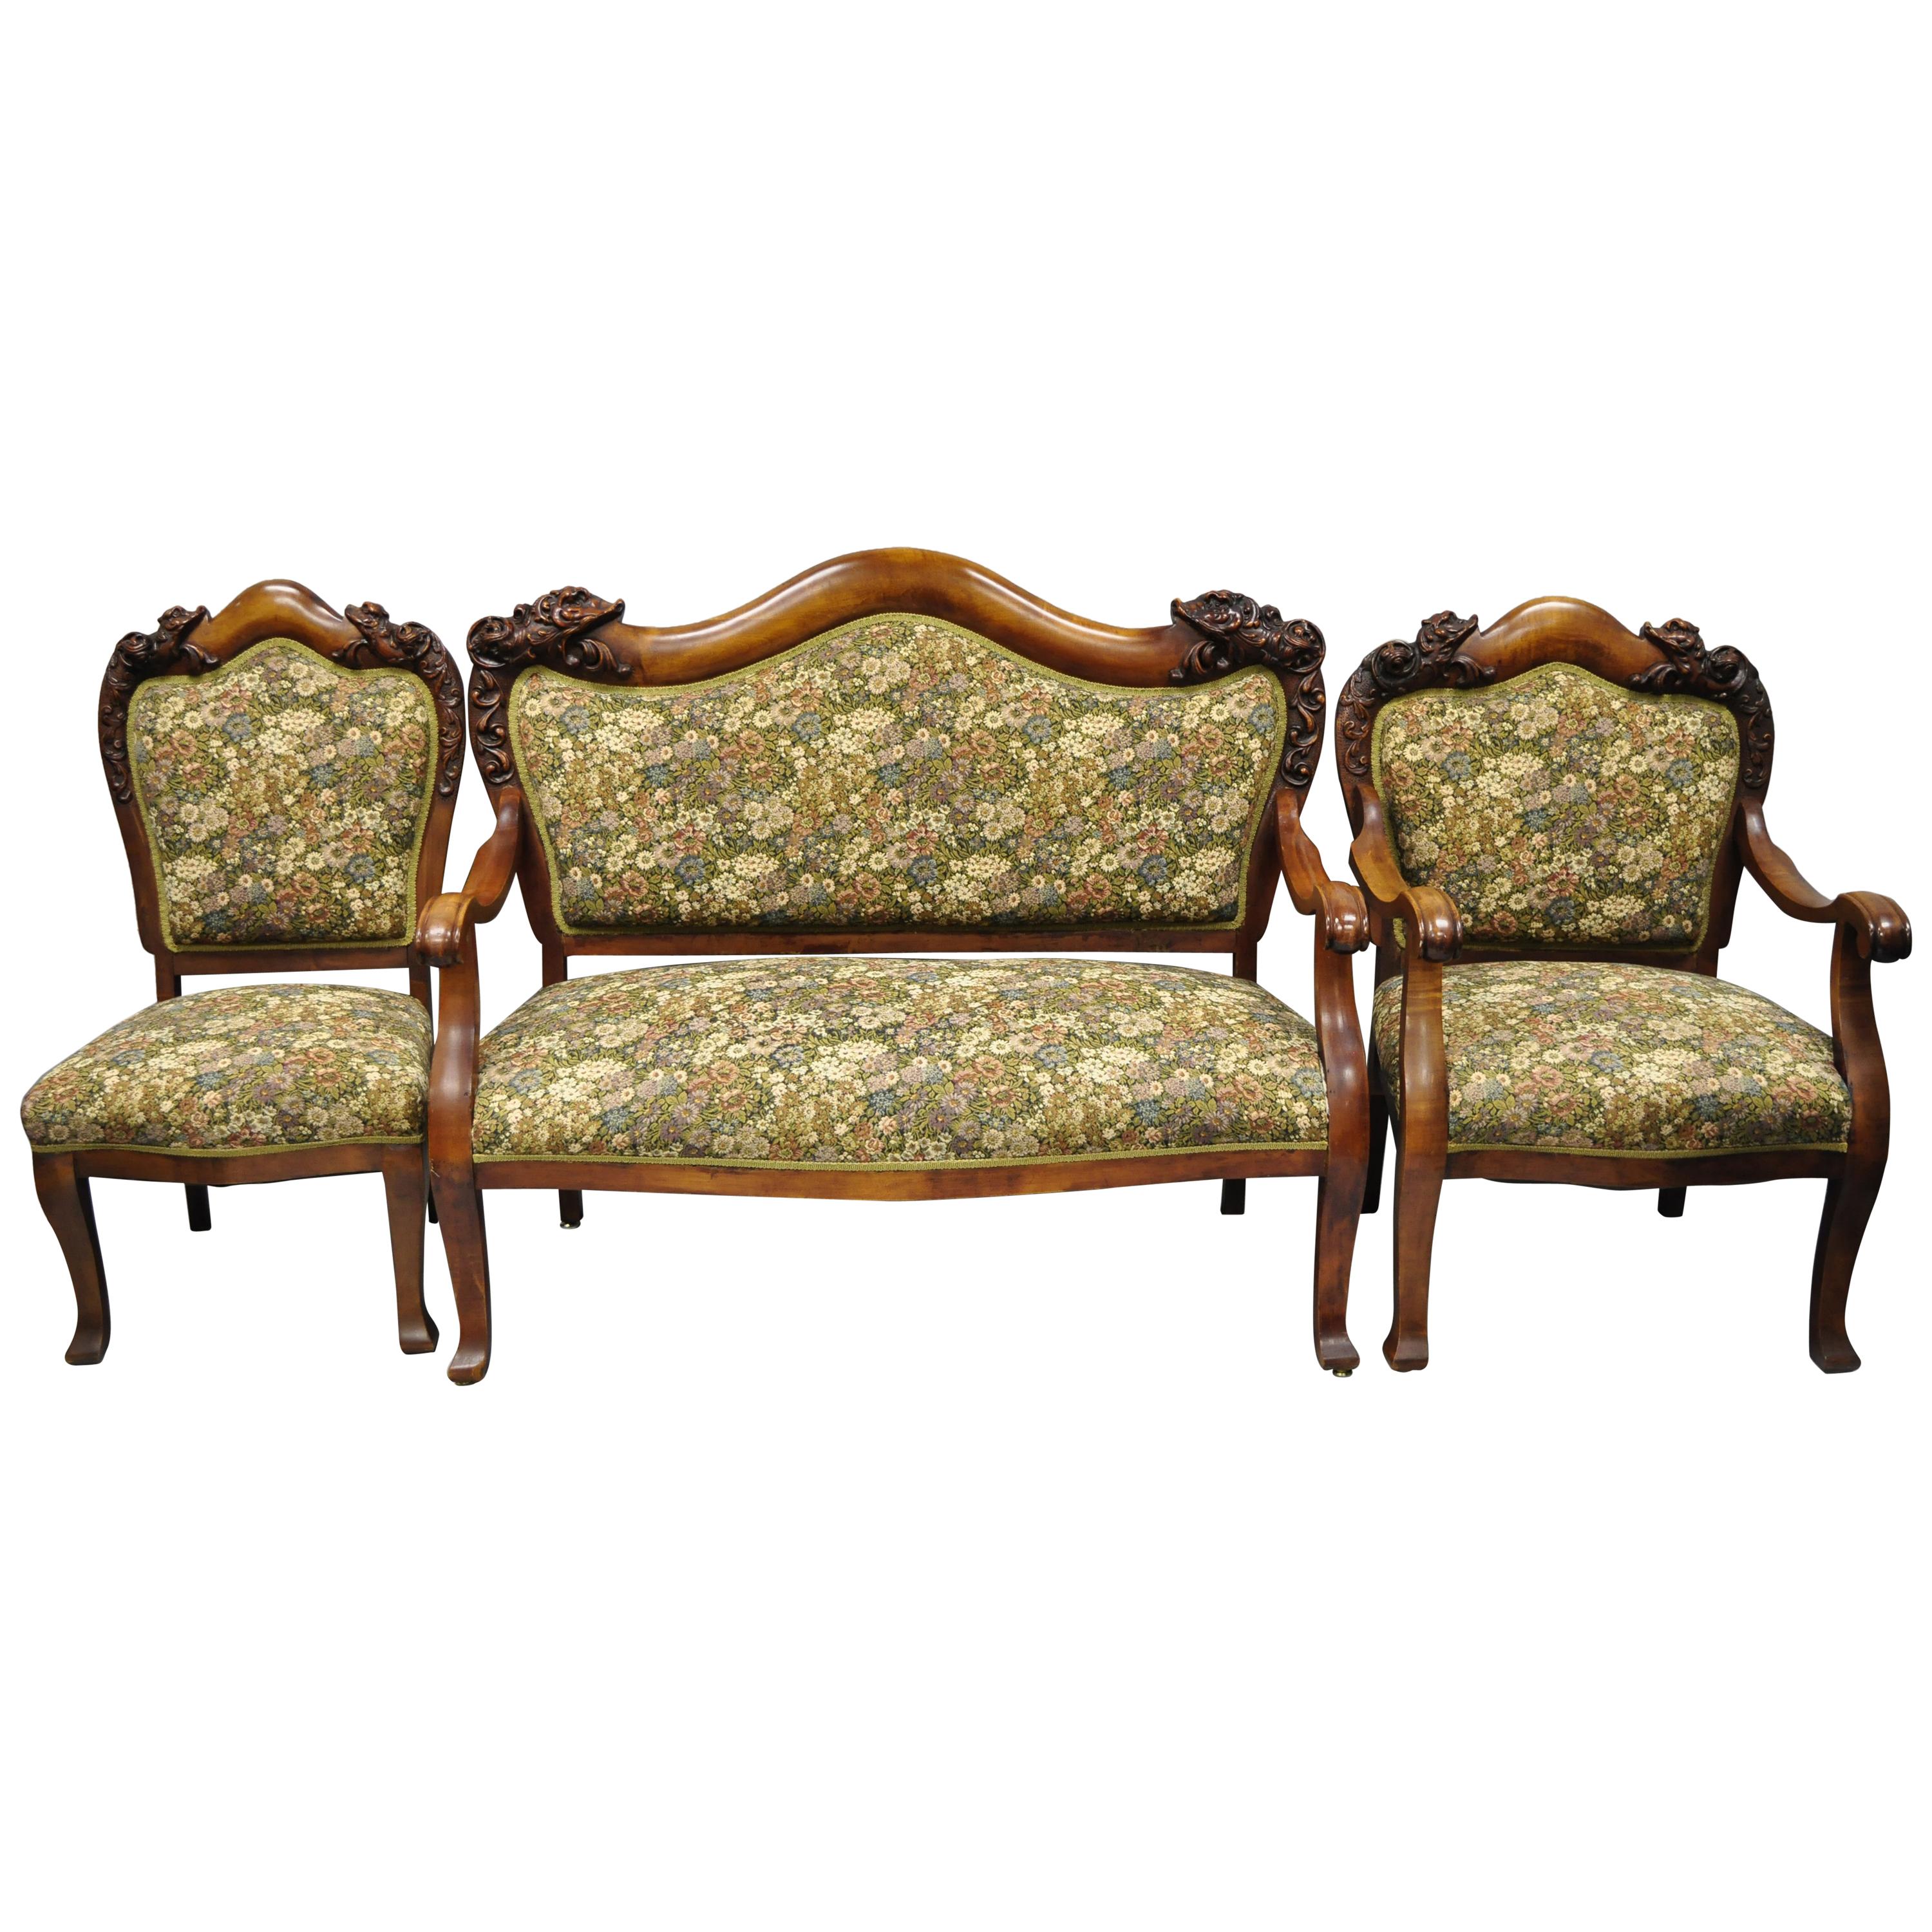 3 Pc Victorian Empire Mahogany Dolphin Carved Parlor Set Settee Armchair & Chair